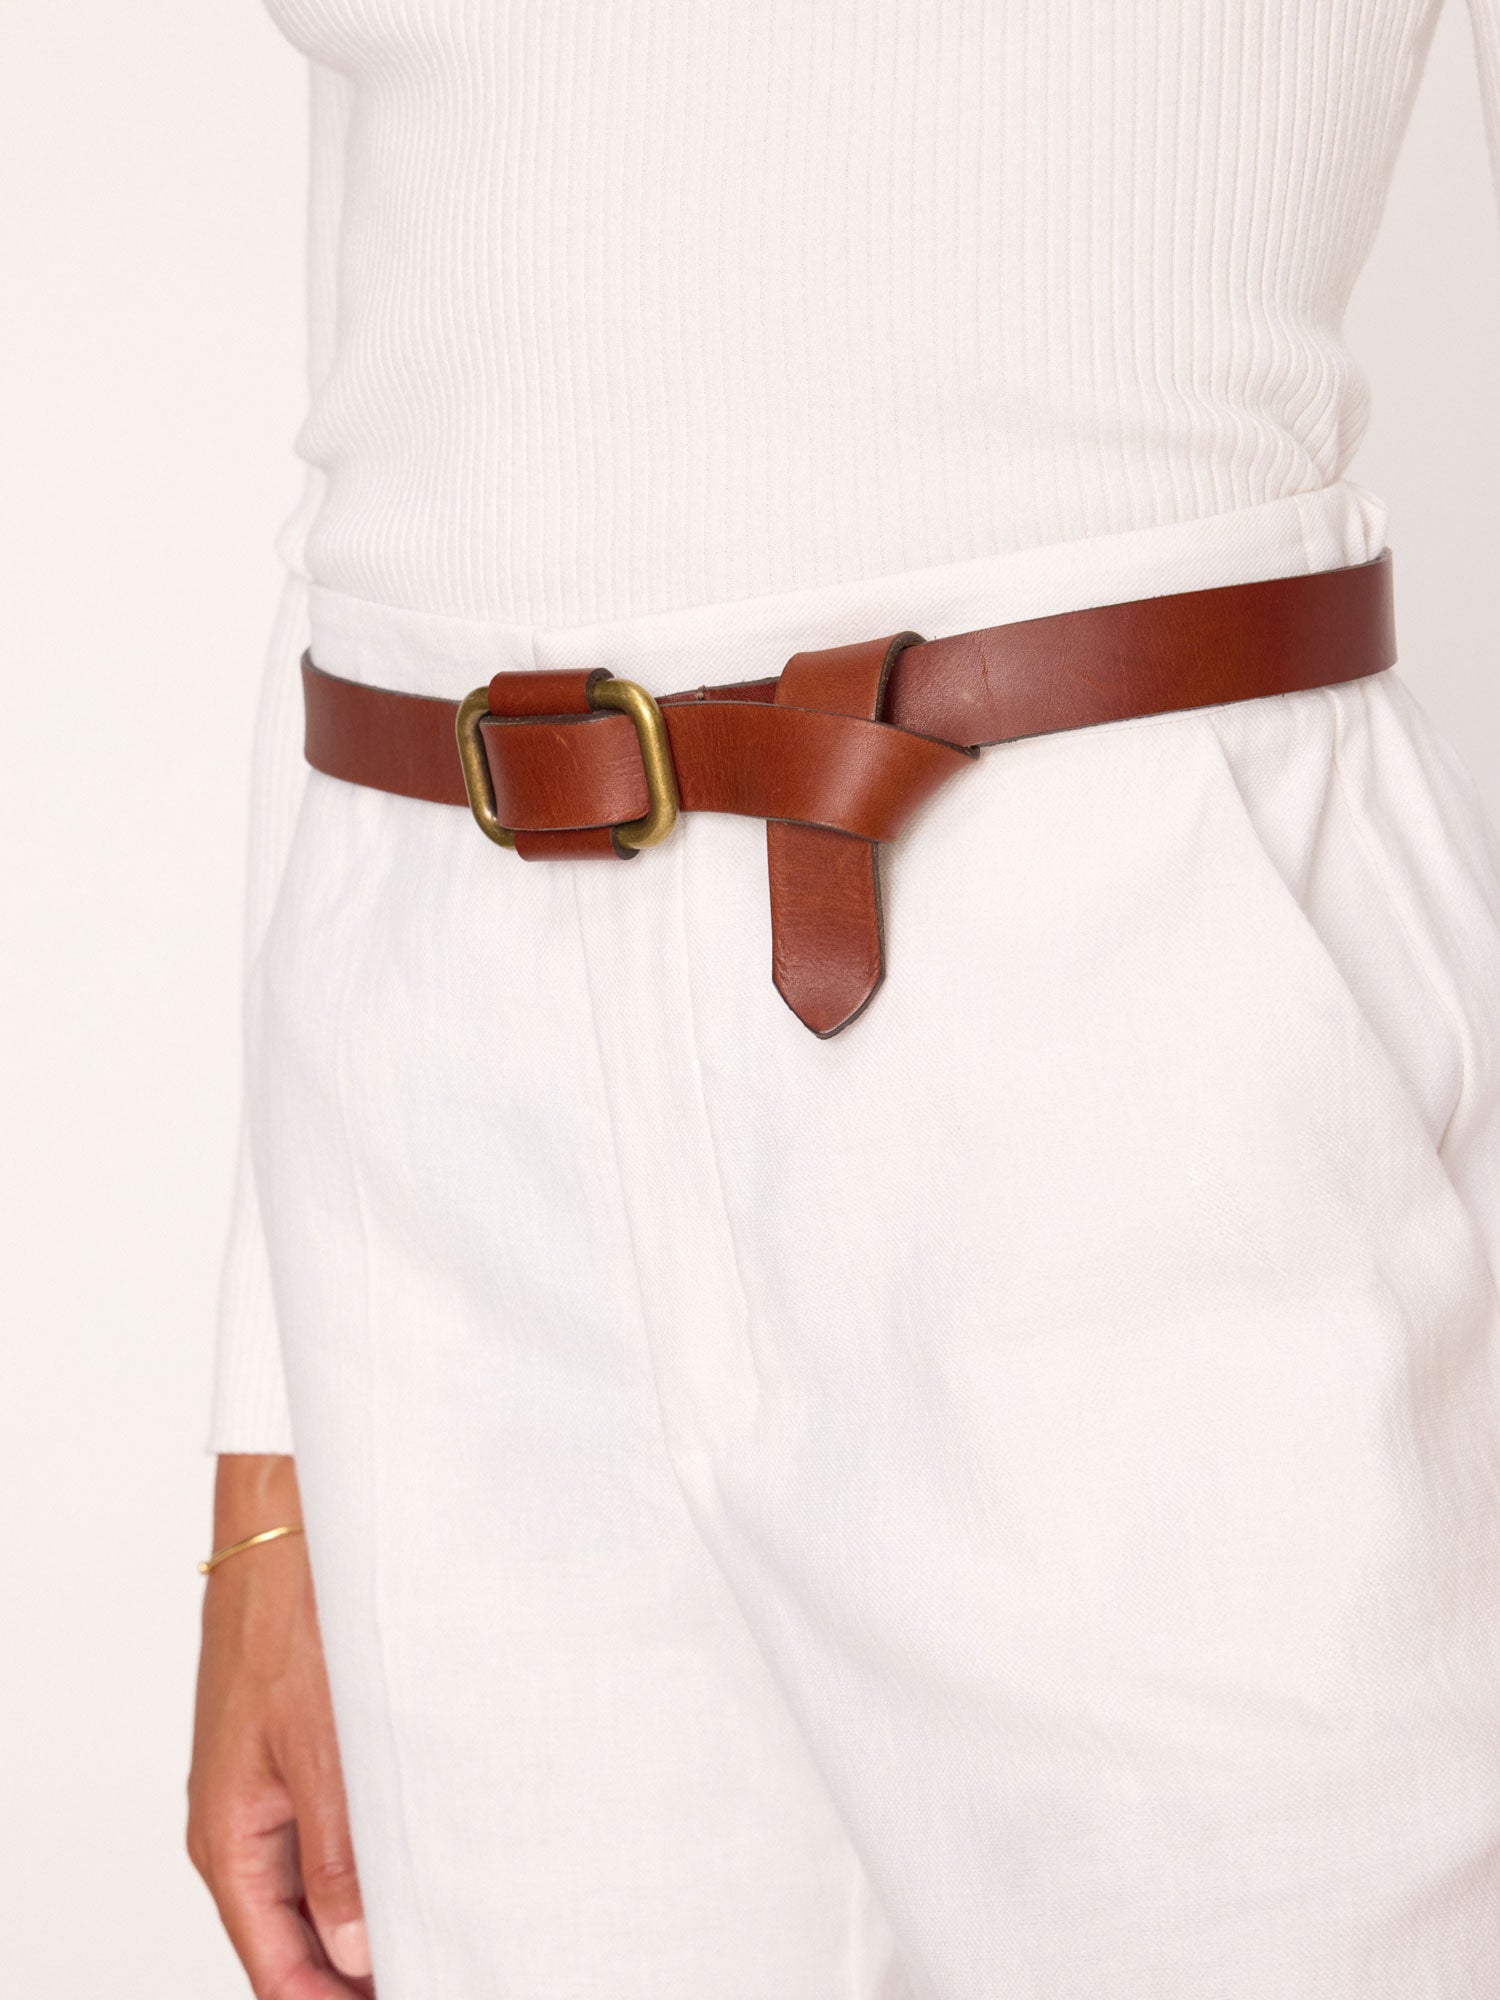 Saddle brown leather buckle belt side view